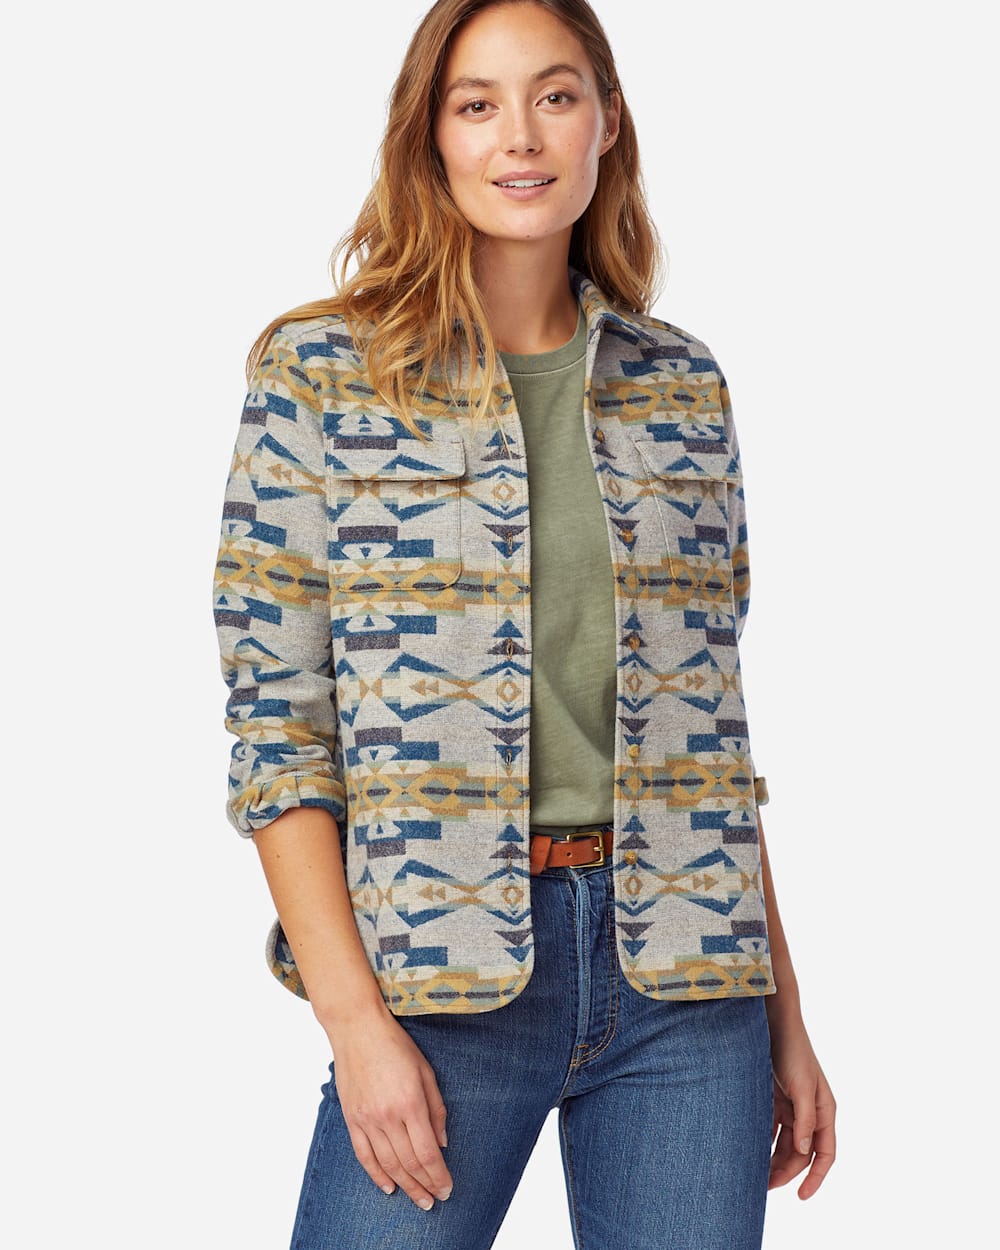 WOMEN'S LIMITED EDITION JACQUARD BOARD SHIRT IN TAN CANYON CREEK image number 1